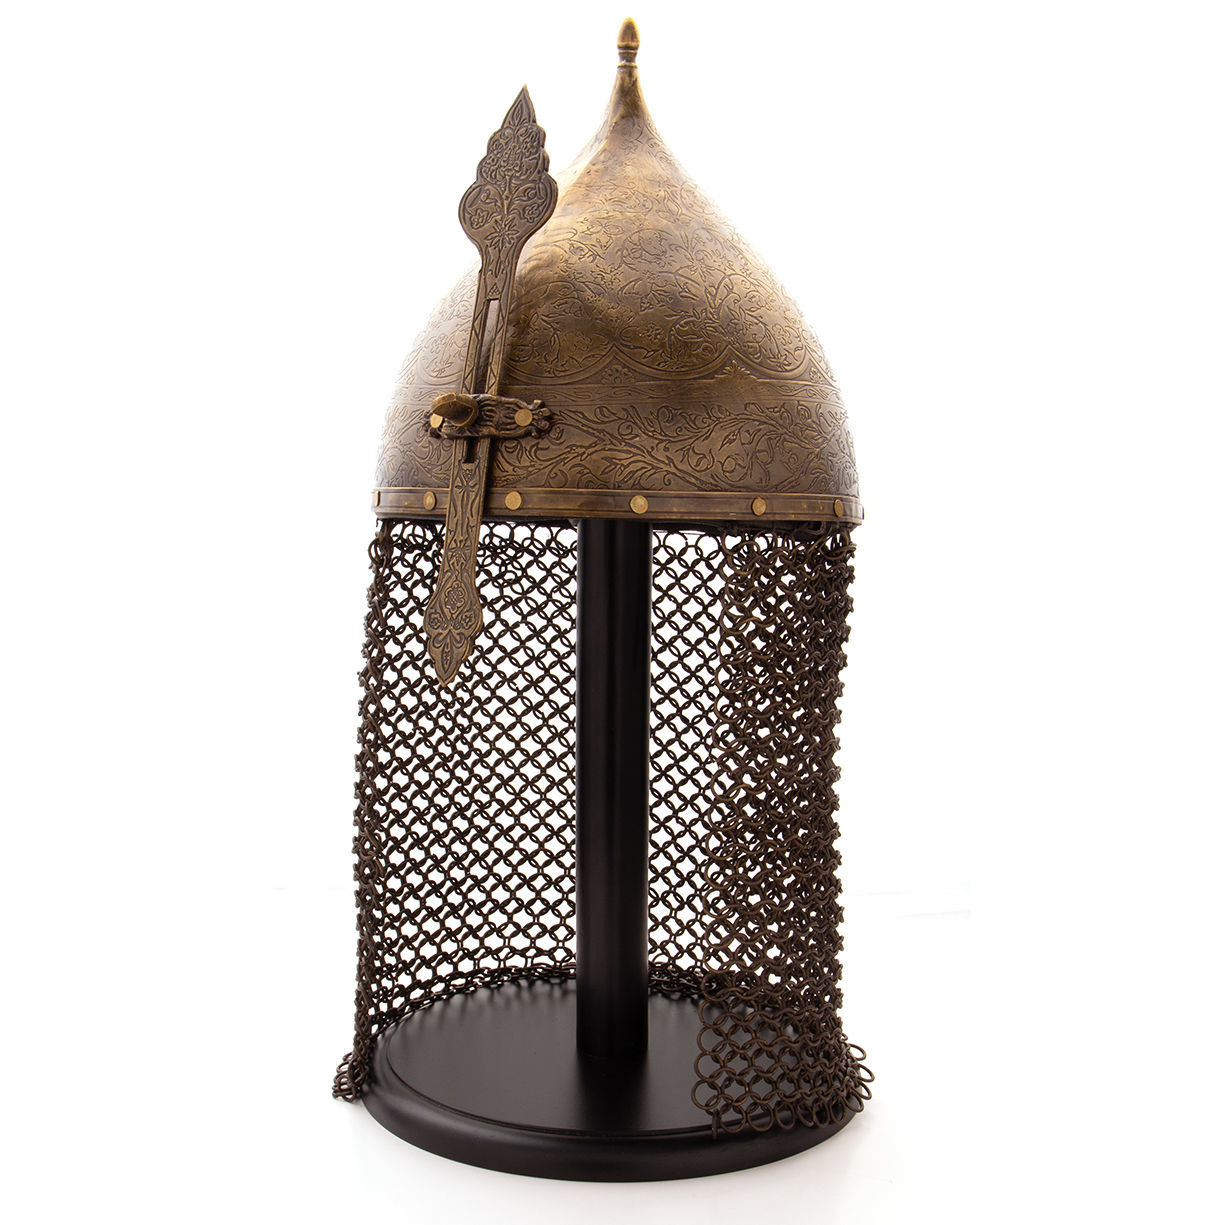 solid brass Indo-Persian fighting helmet is engraved, features brass mail aventail, and ornately embellished brass nasal bar 